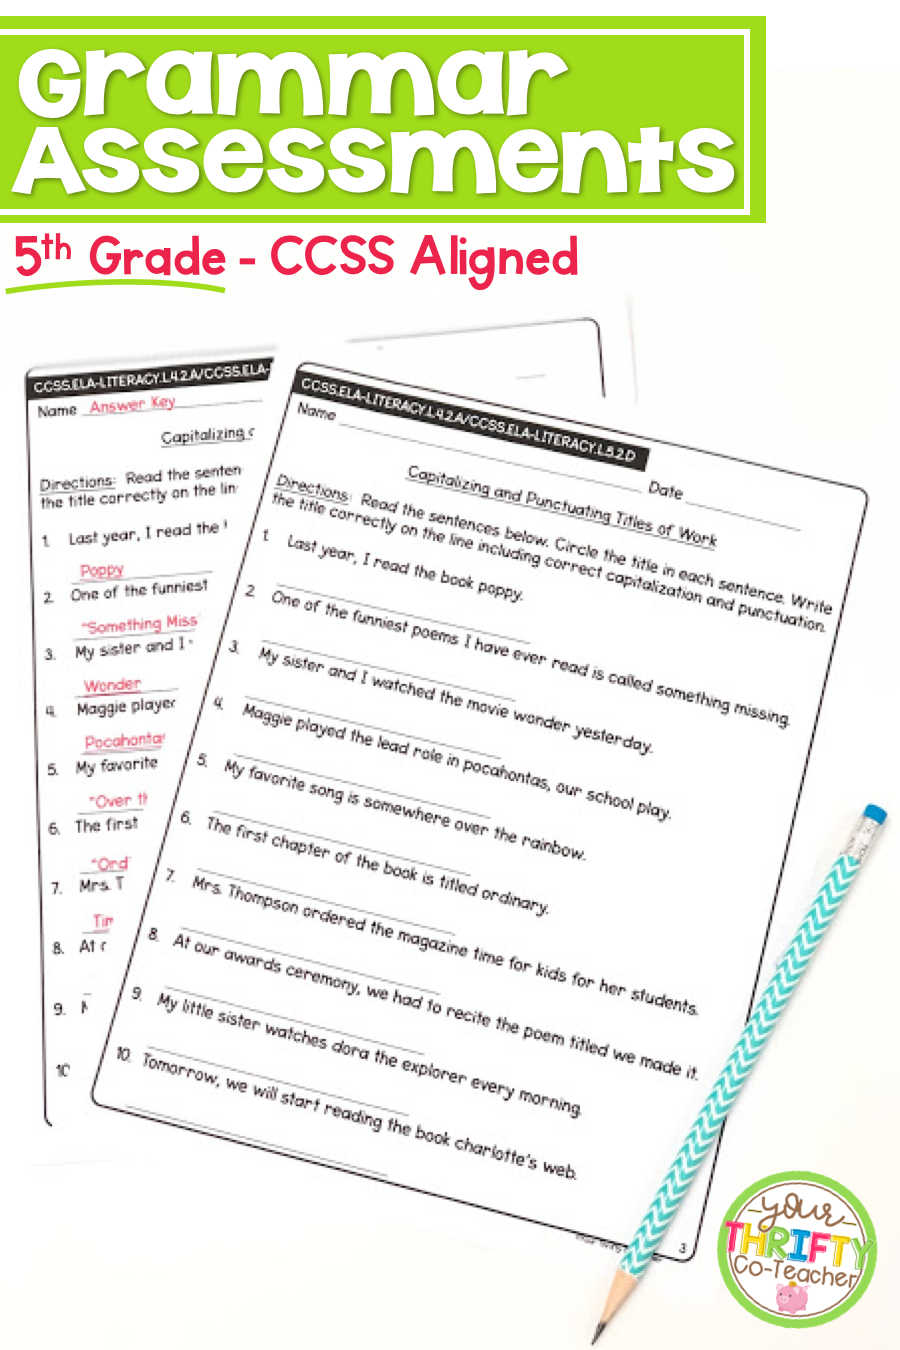 5th Grade Grammar Assessments Common Core Aligned Teaching Writing 